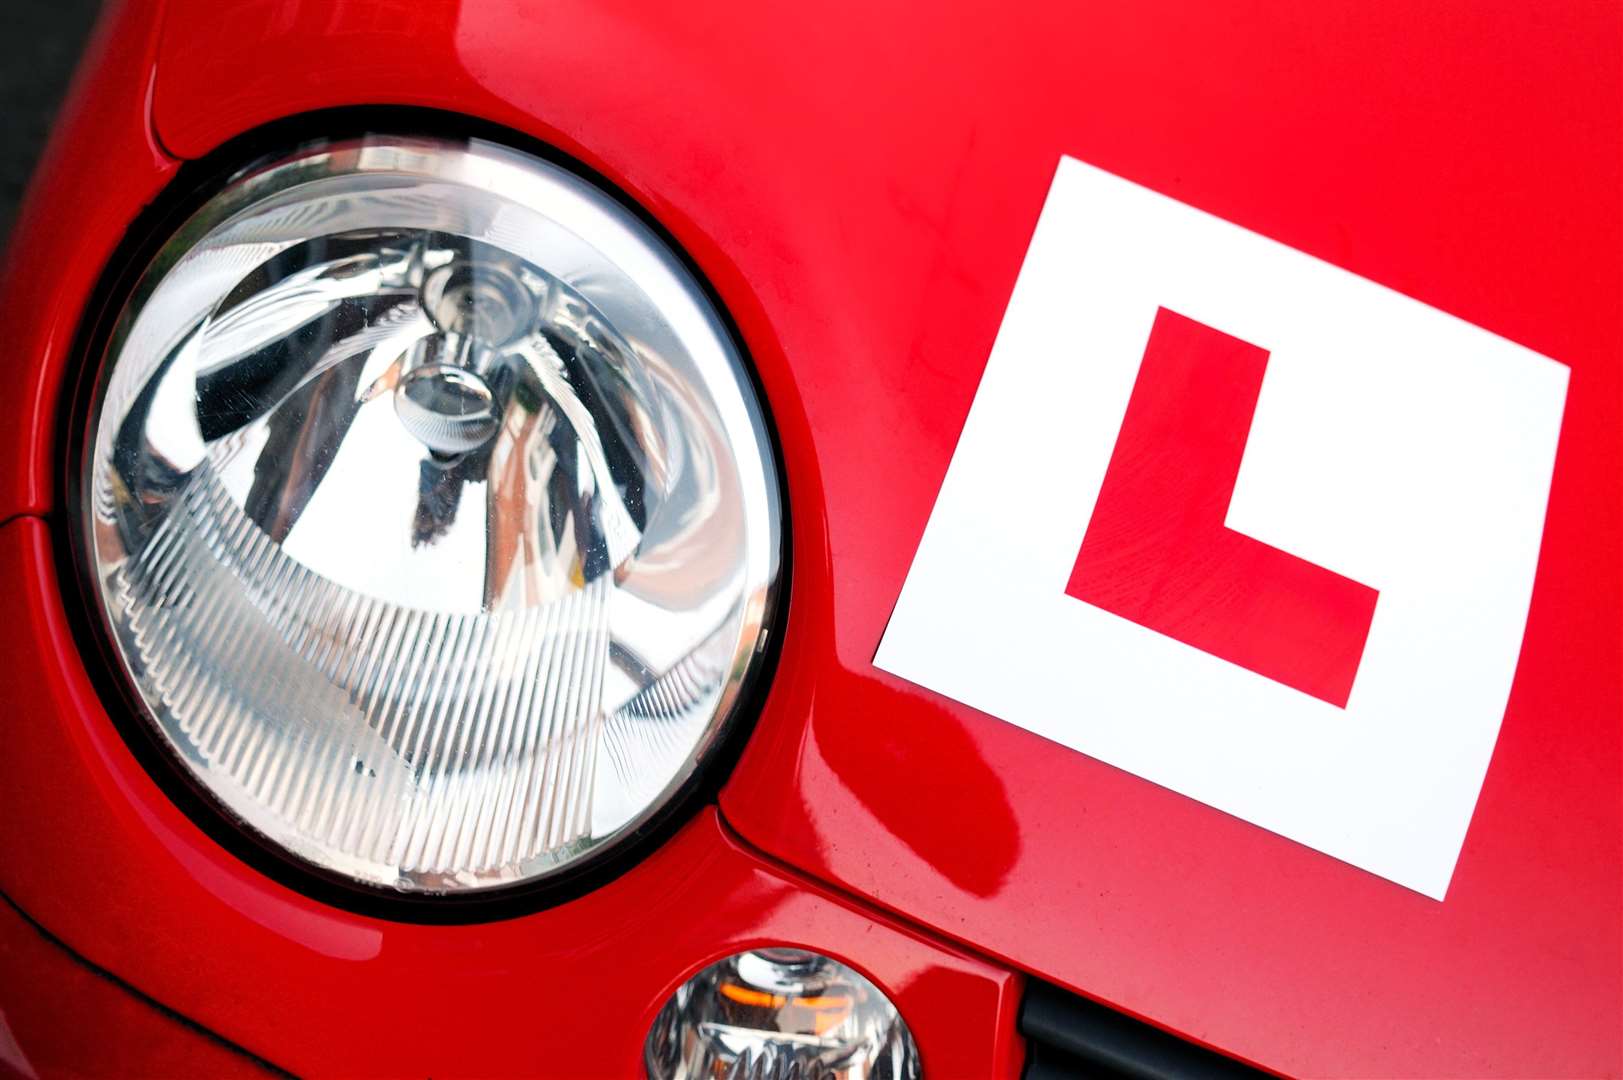 The number of uninsured learner drivers rose during the pandemic